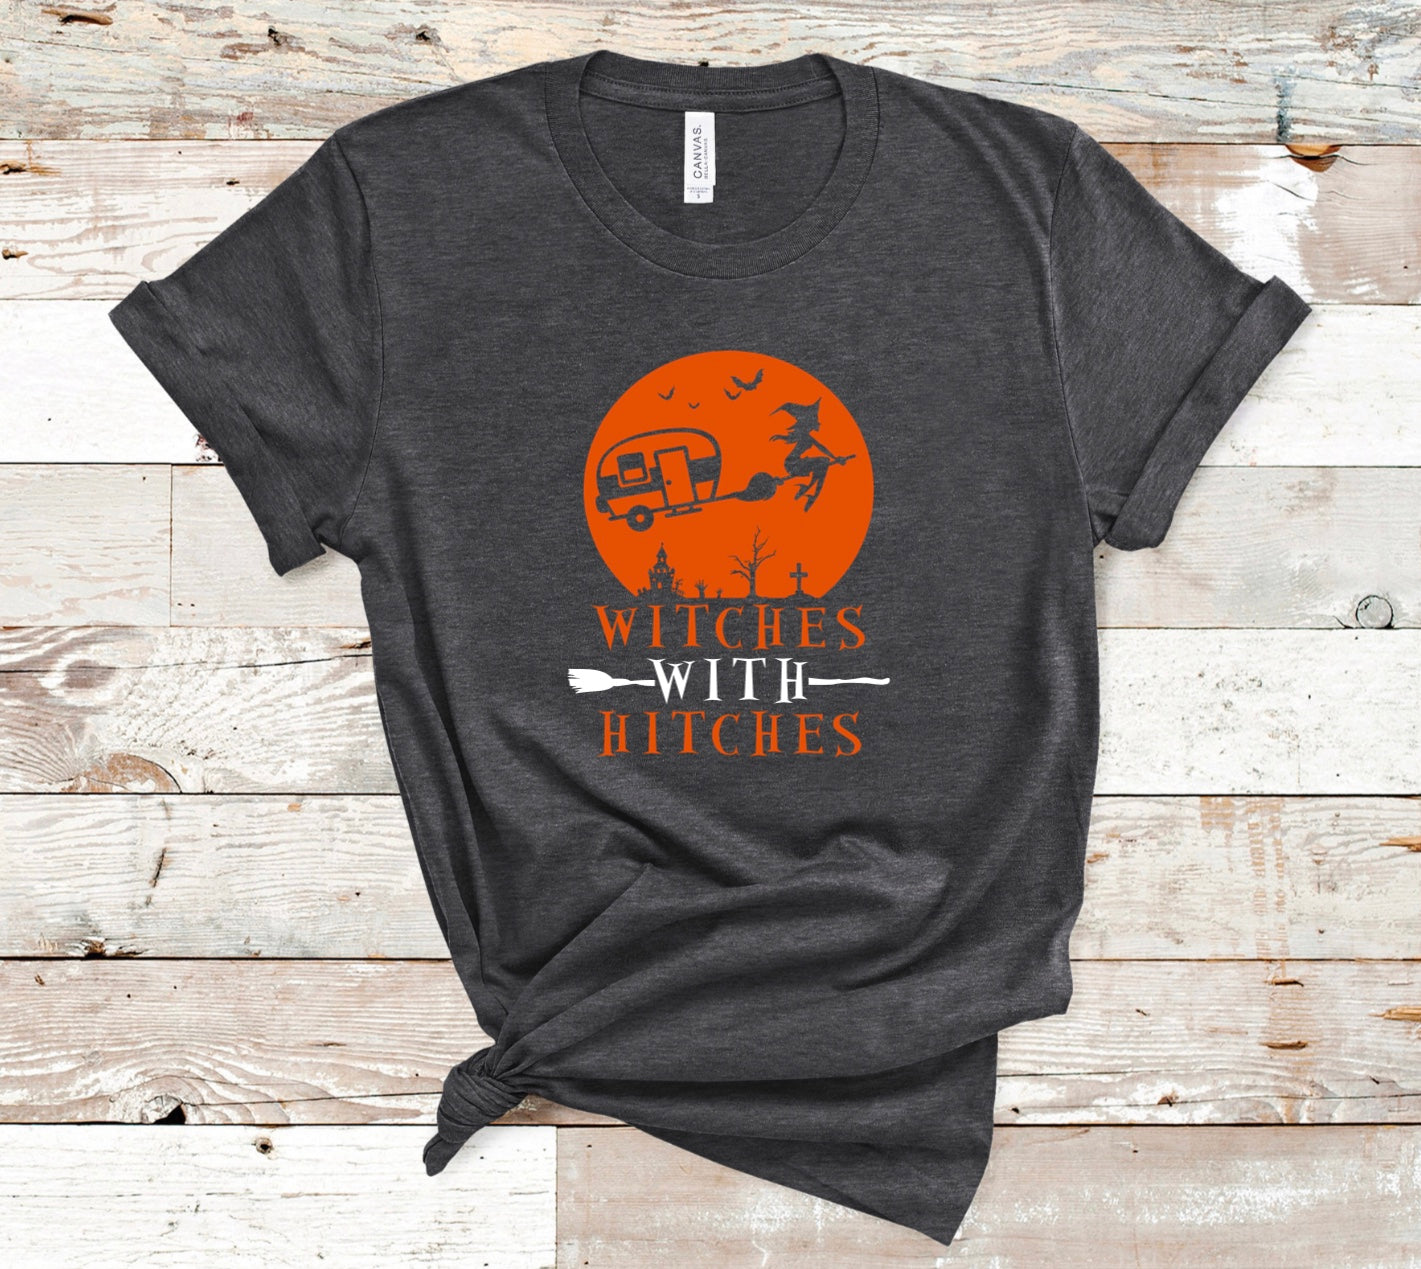 Witches with hitches t-shirt 